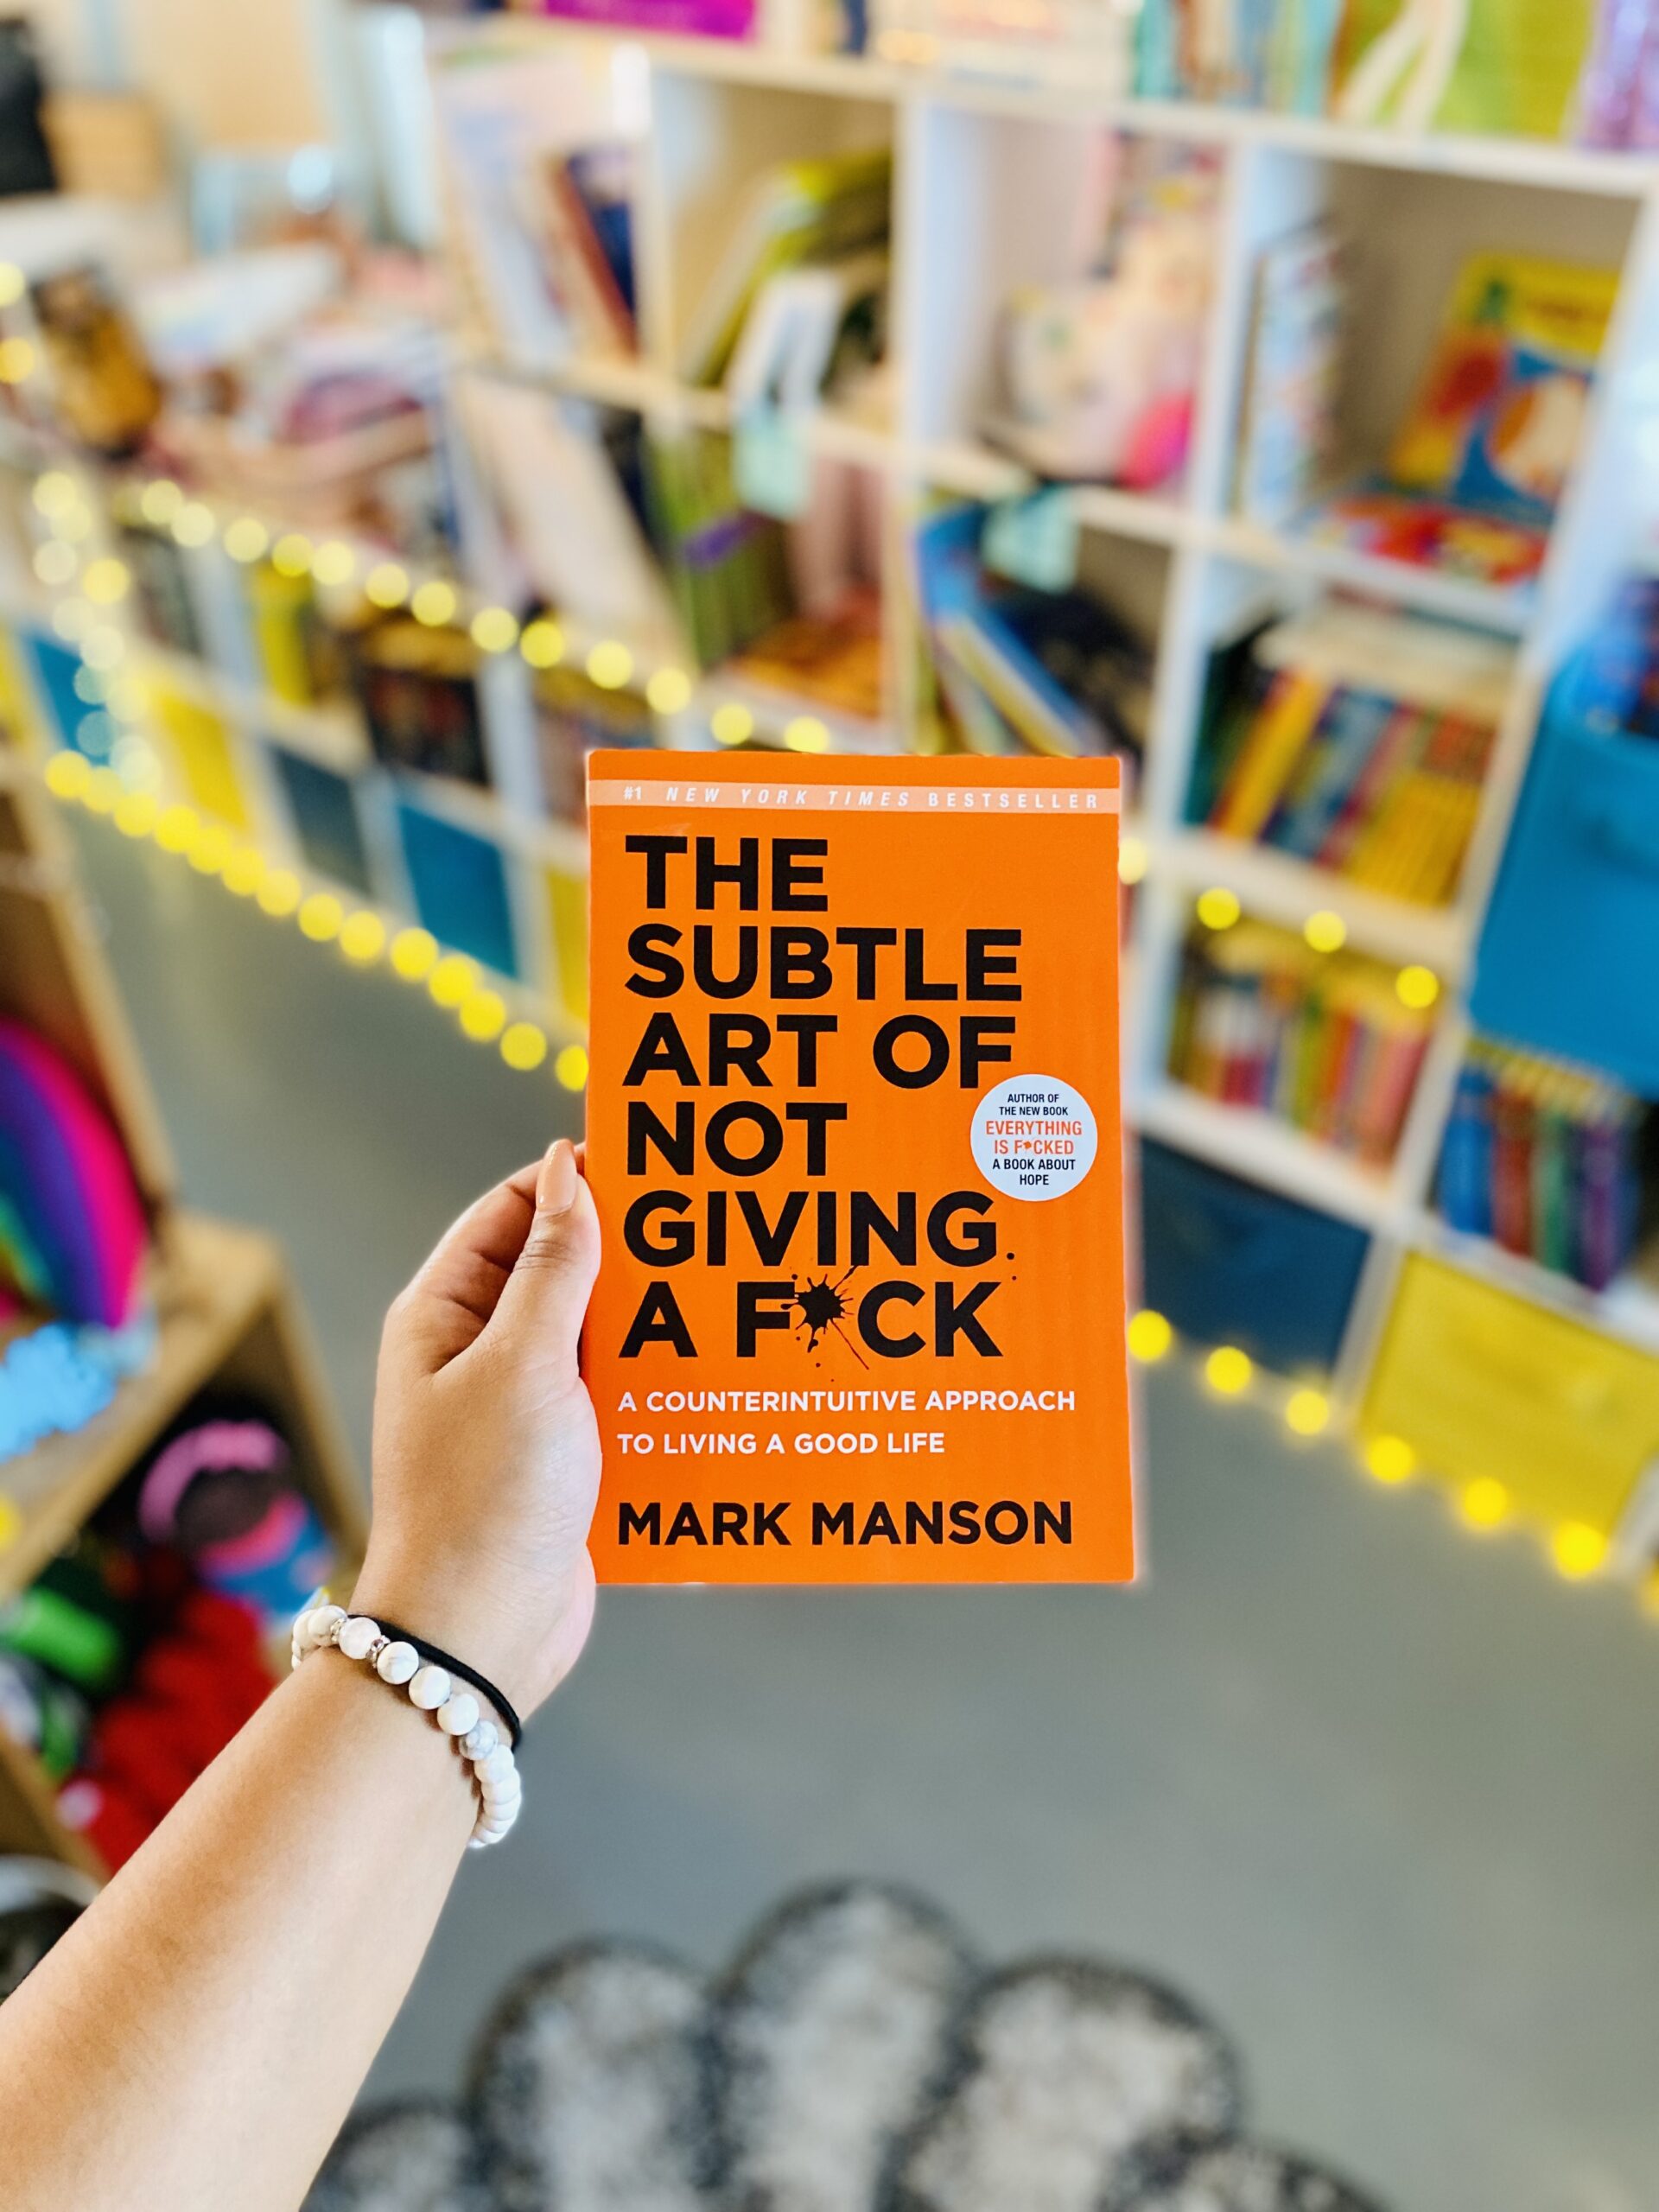 Mark Manson Interview – Stop Giving a F*ck? Why & how.